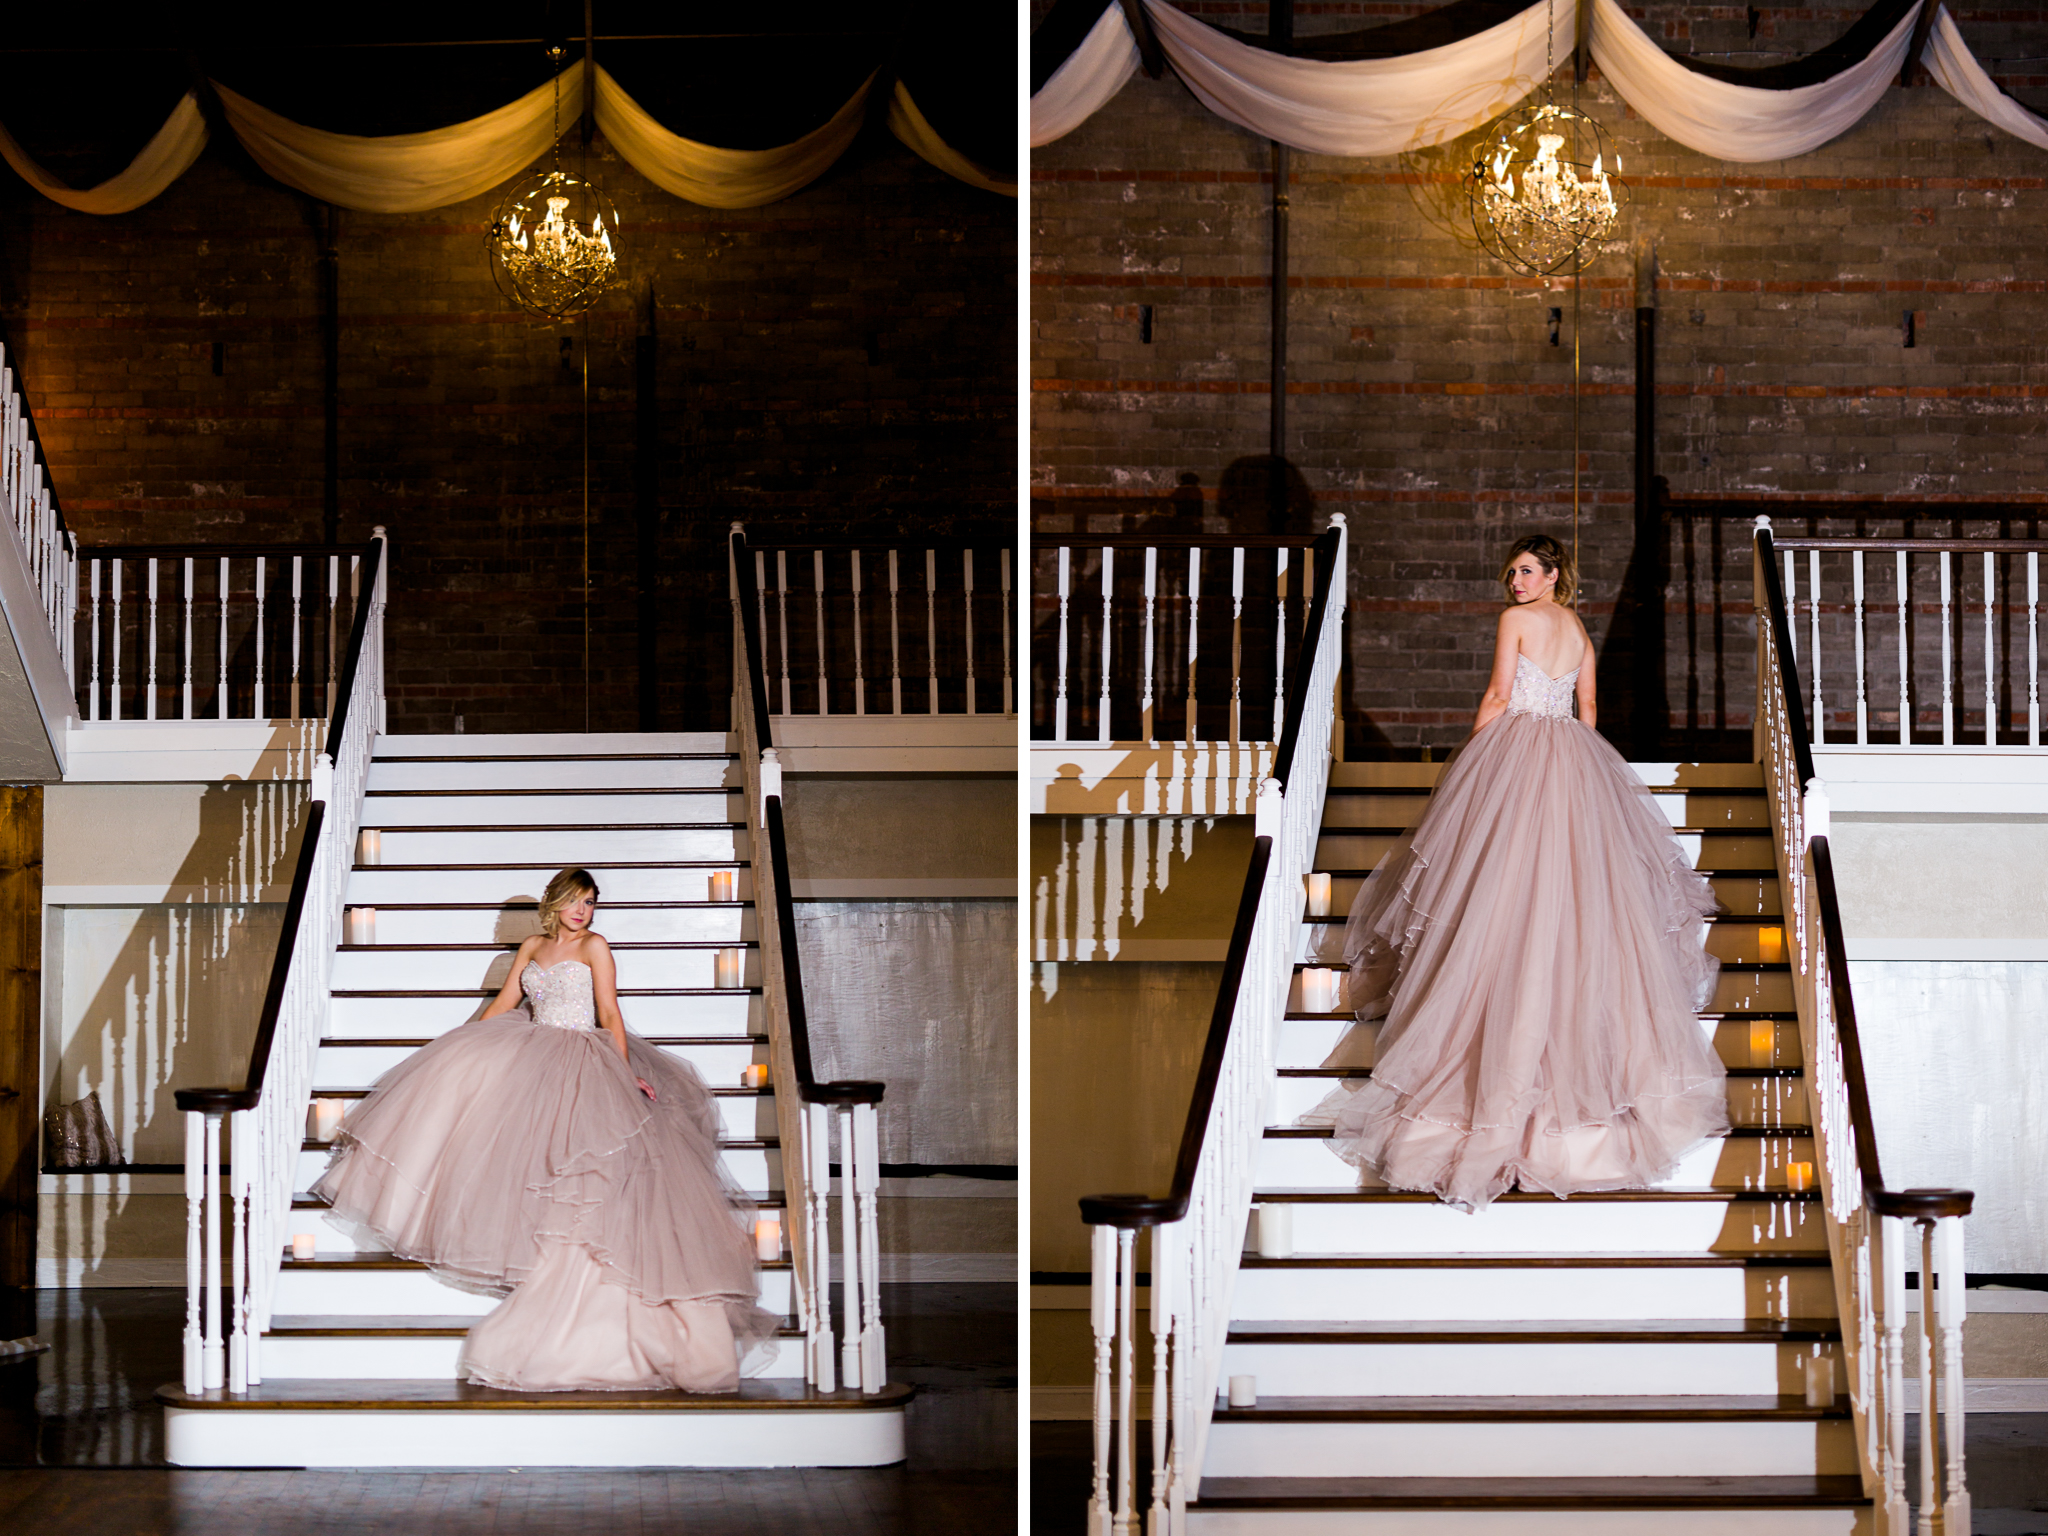 The Grand Canadian Theater OKC Purcell Wedding Venue Ashley Porton Photography justin alexander blush gown moliere bridal.jpg